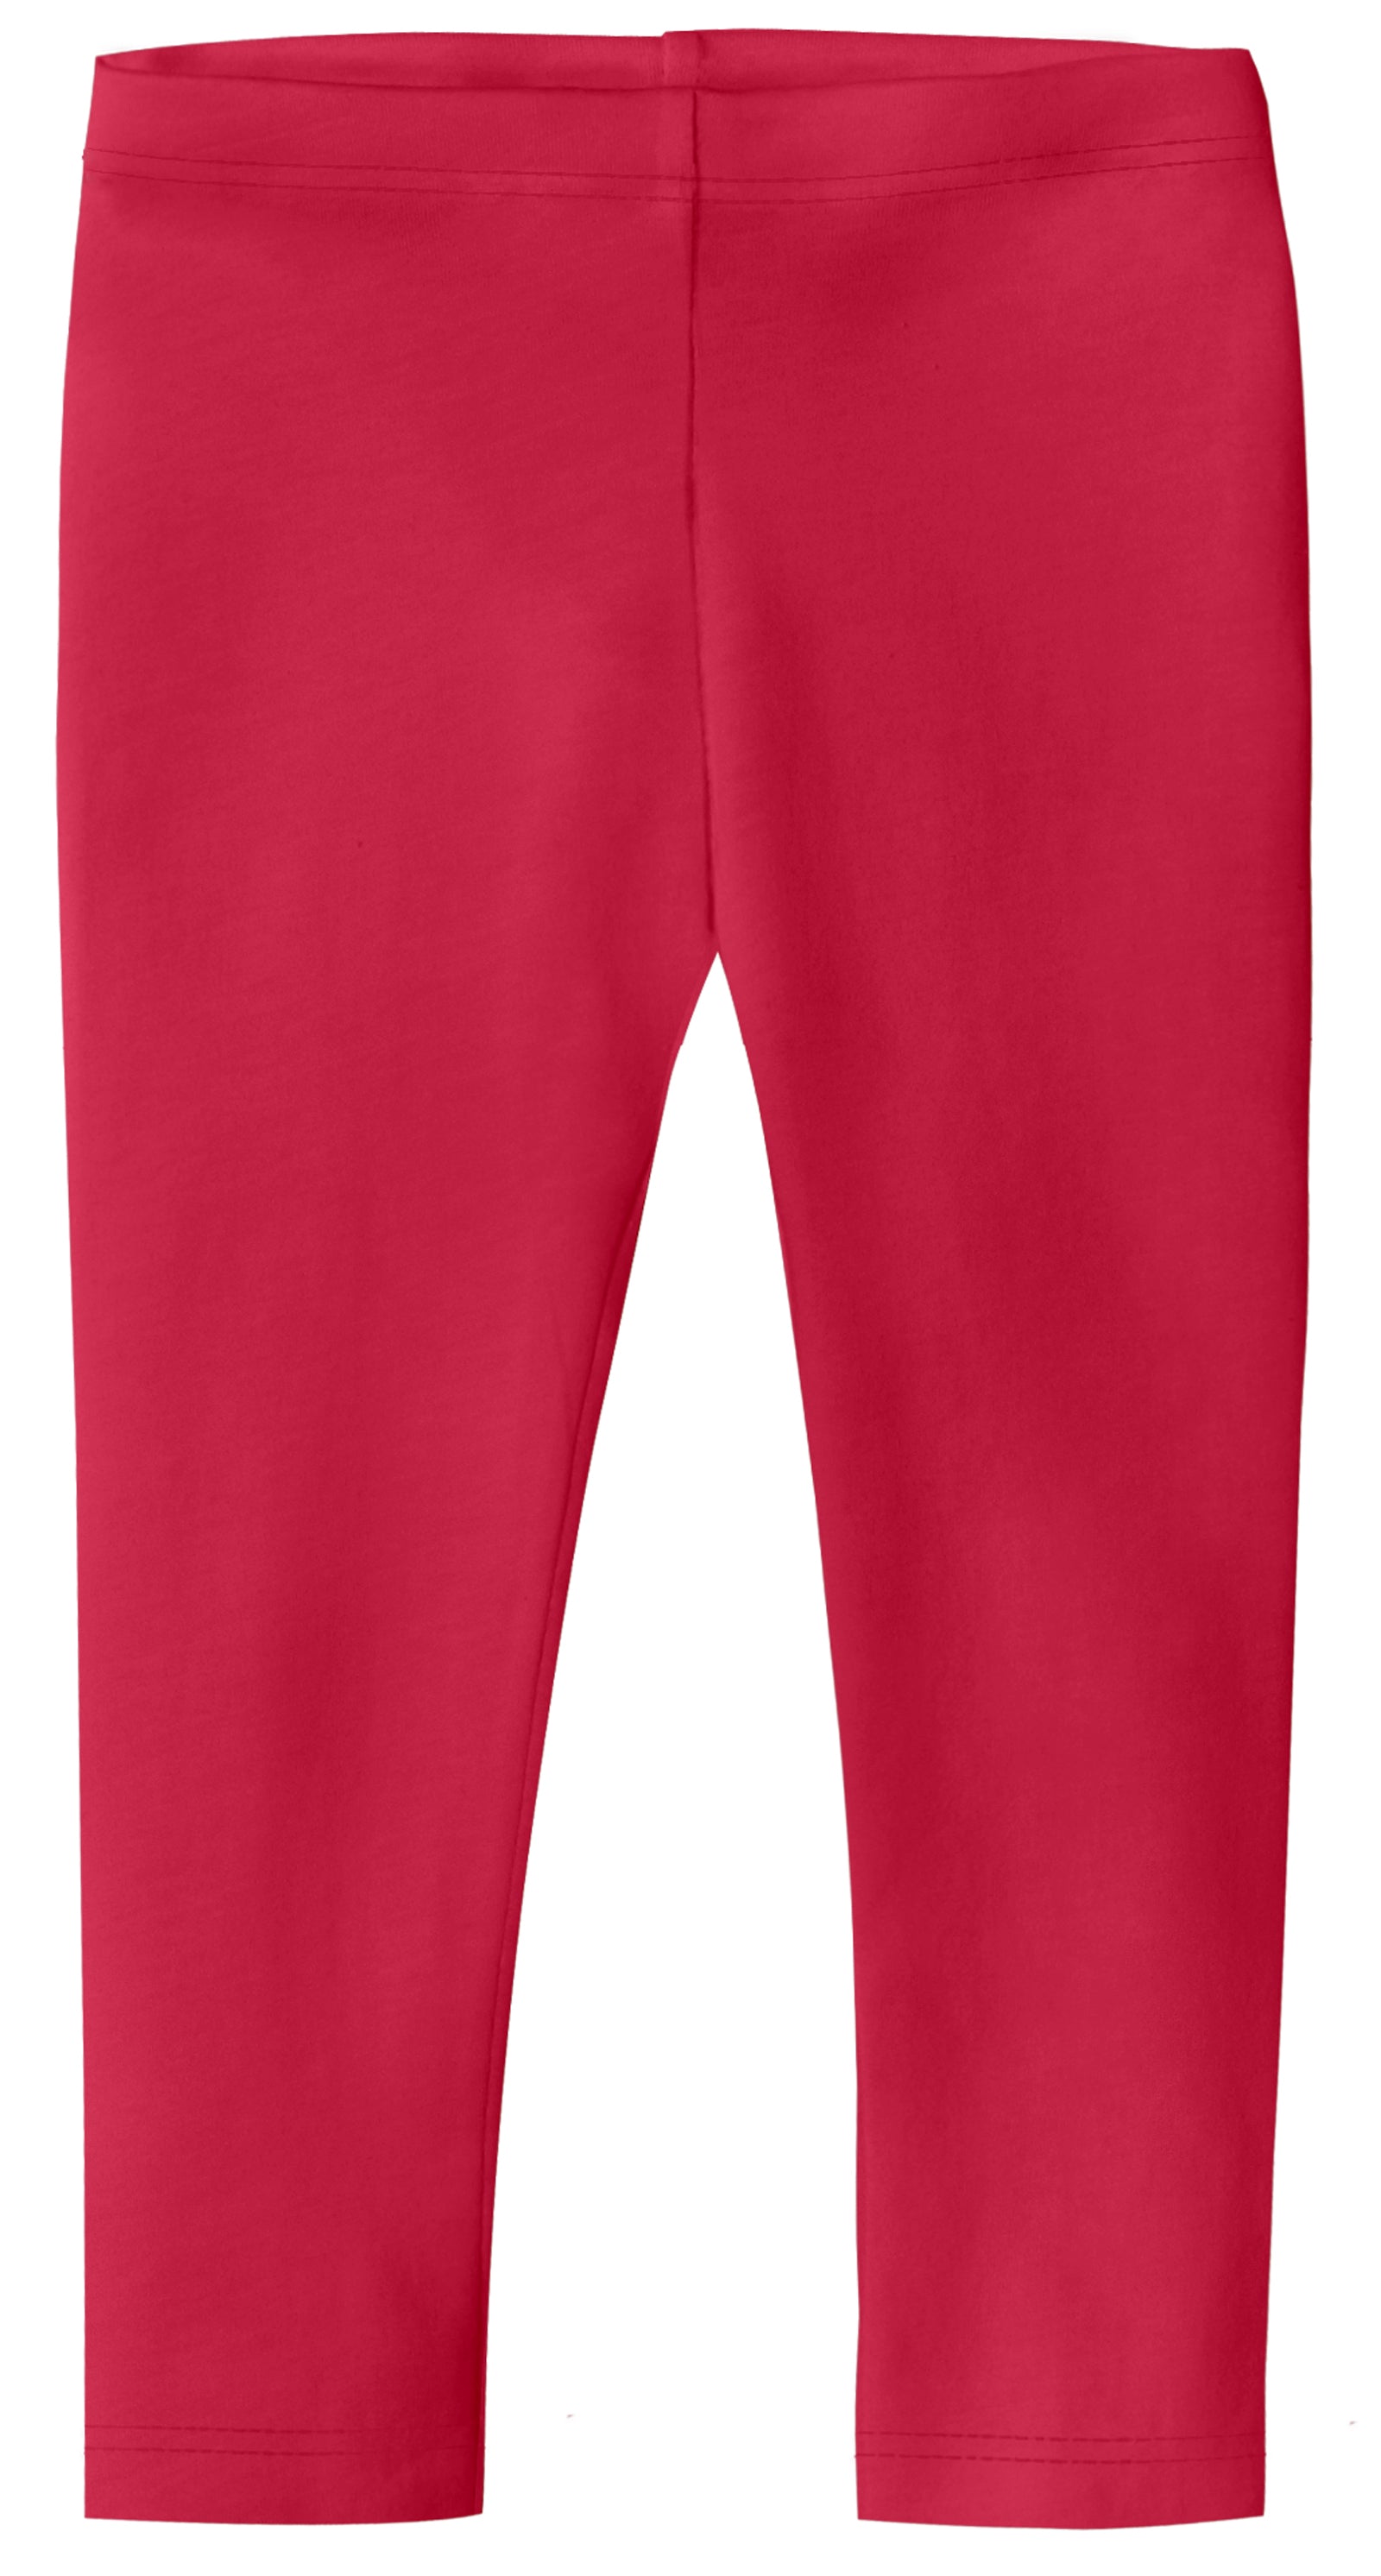 Buy IndiWeaves Girls Printed Cotton Capri Pants for Summer  (Magenta,Green,Navy Blue, 4-5 Years) Pack of 3 at